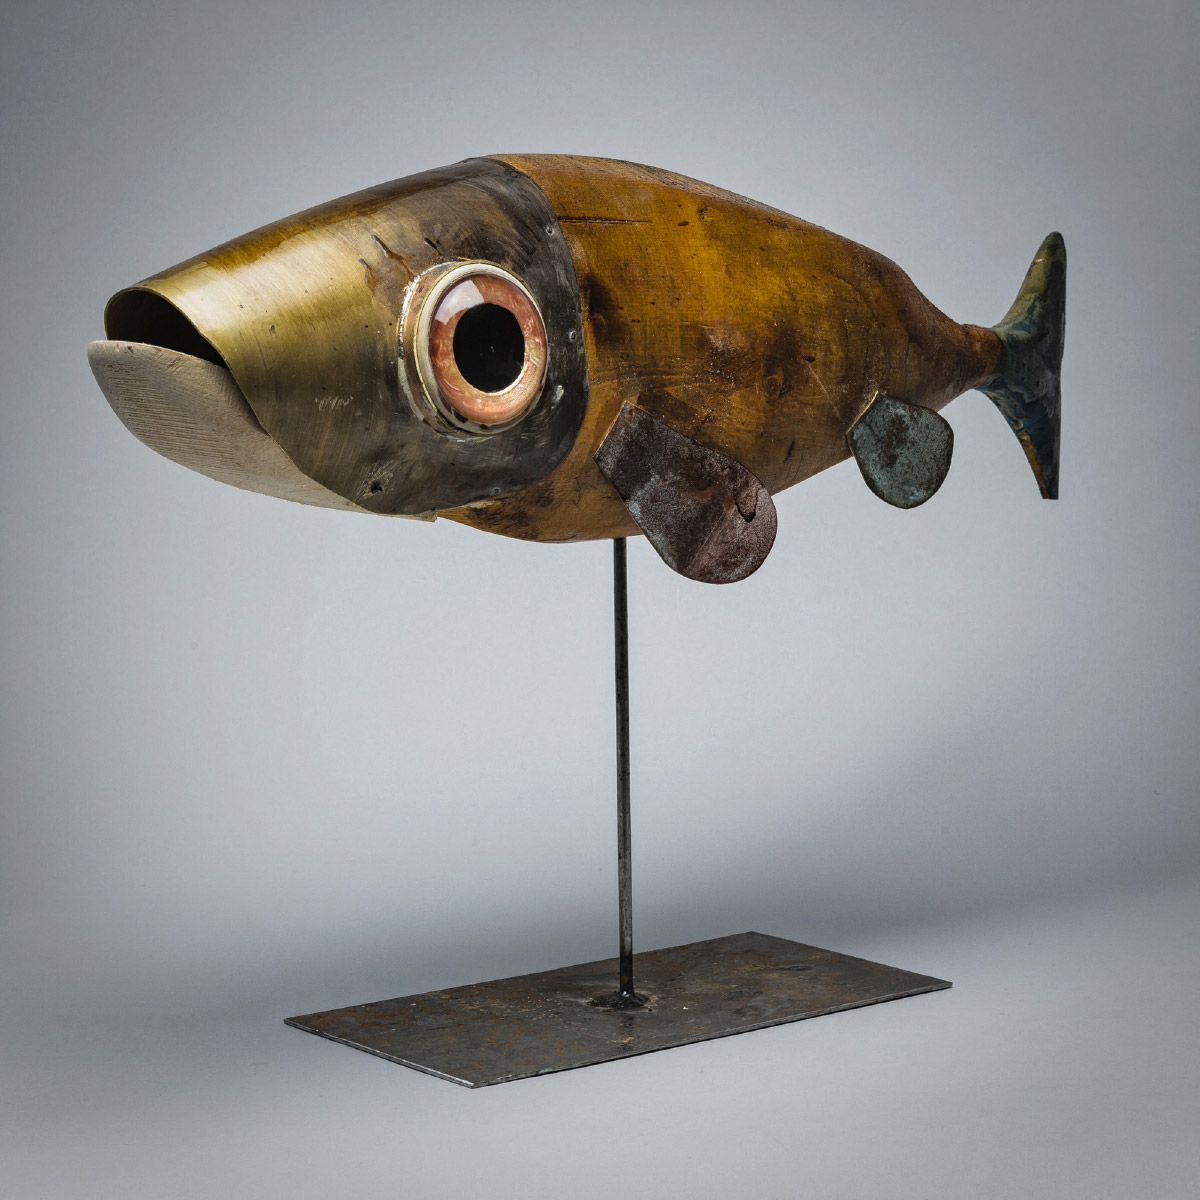 Stefano Prina Sculpture Carved wooden fish brass head turned eyes in acrylic resin iron pedestal shellac